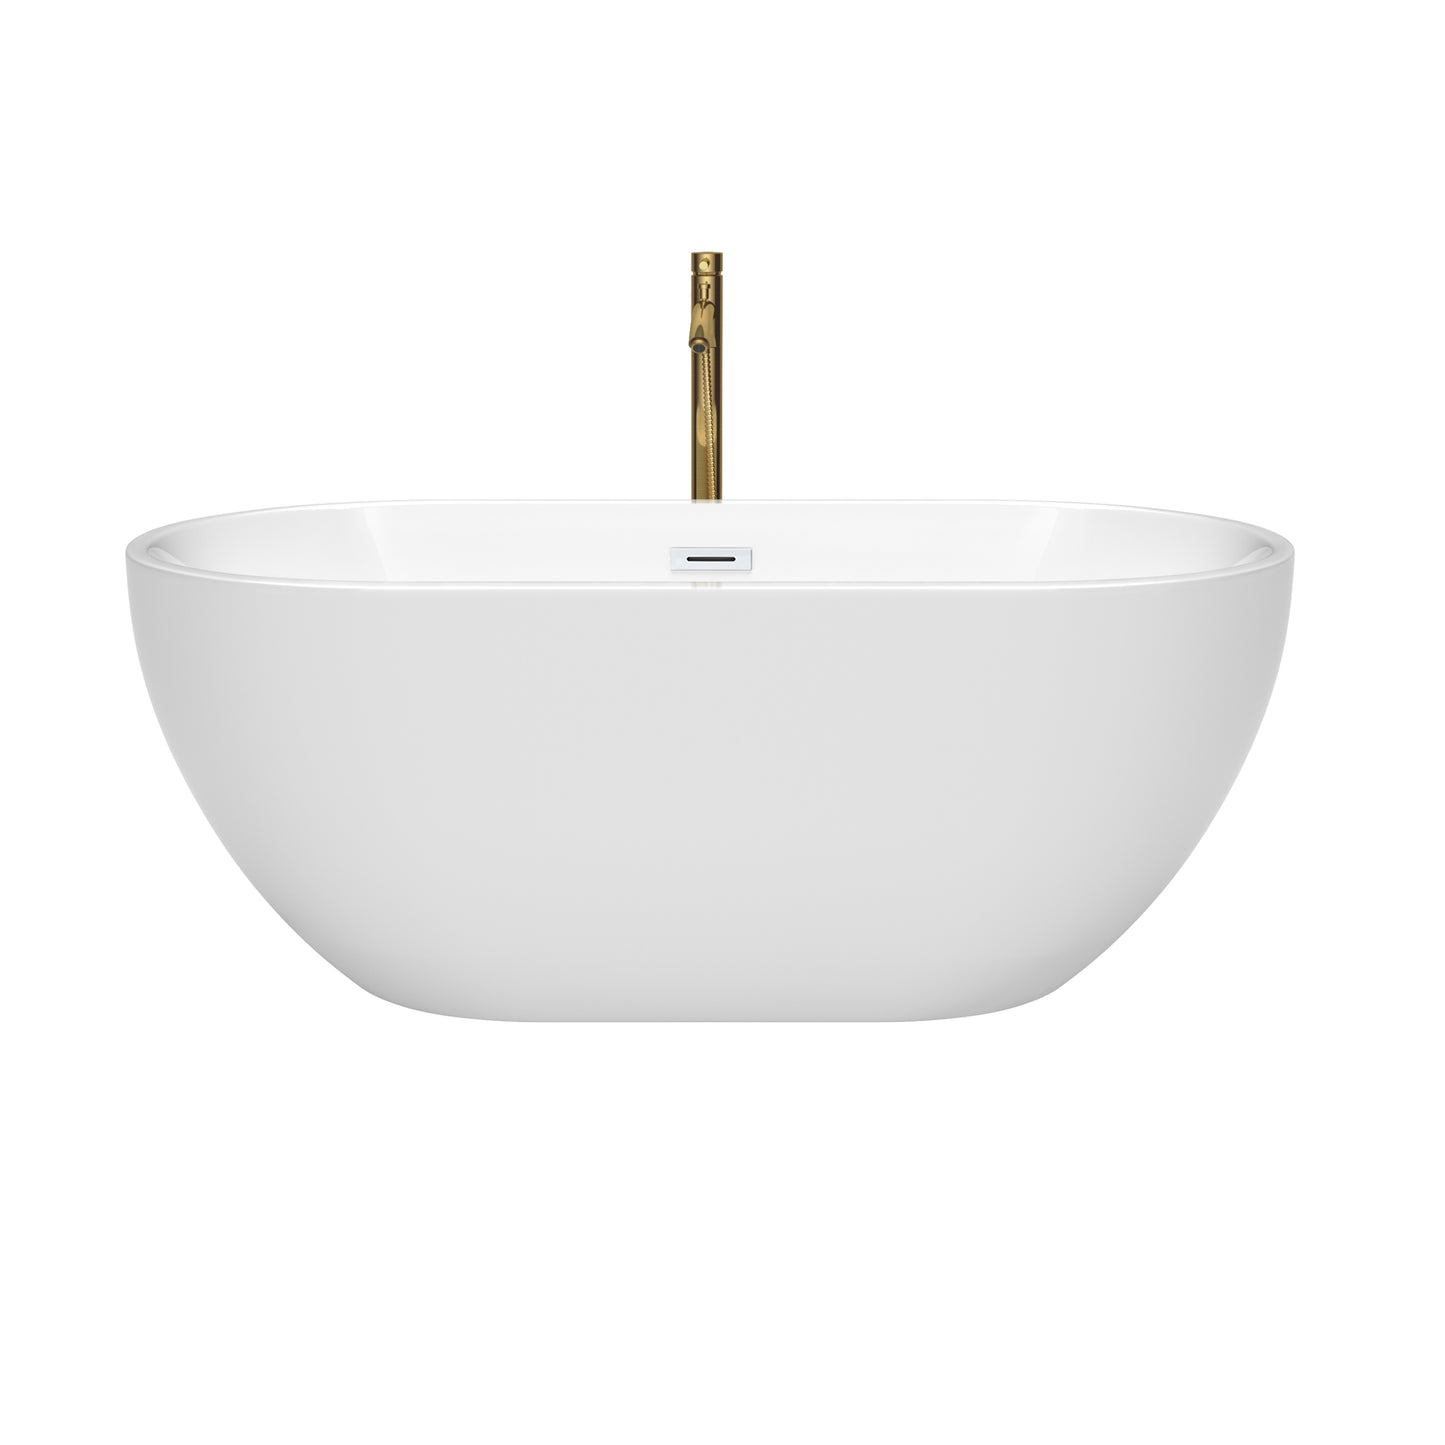 Wyndham Collection Brooklyn 60 Inch Freestanding Bathtub in White with Floor Mounted Faucet, Drain ,Overflow Trim - Luxe Bathroom Vanities